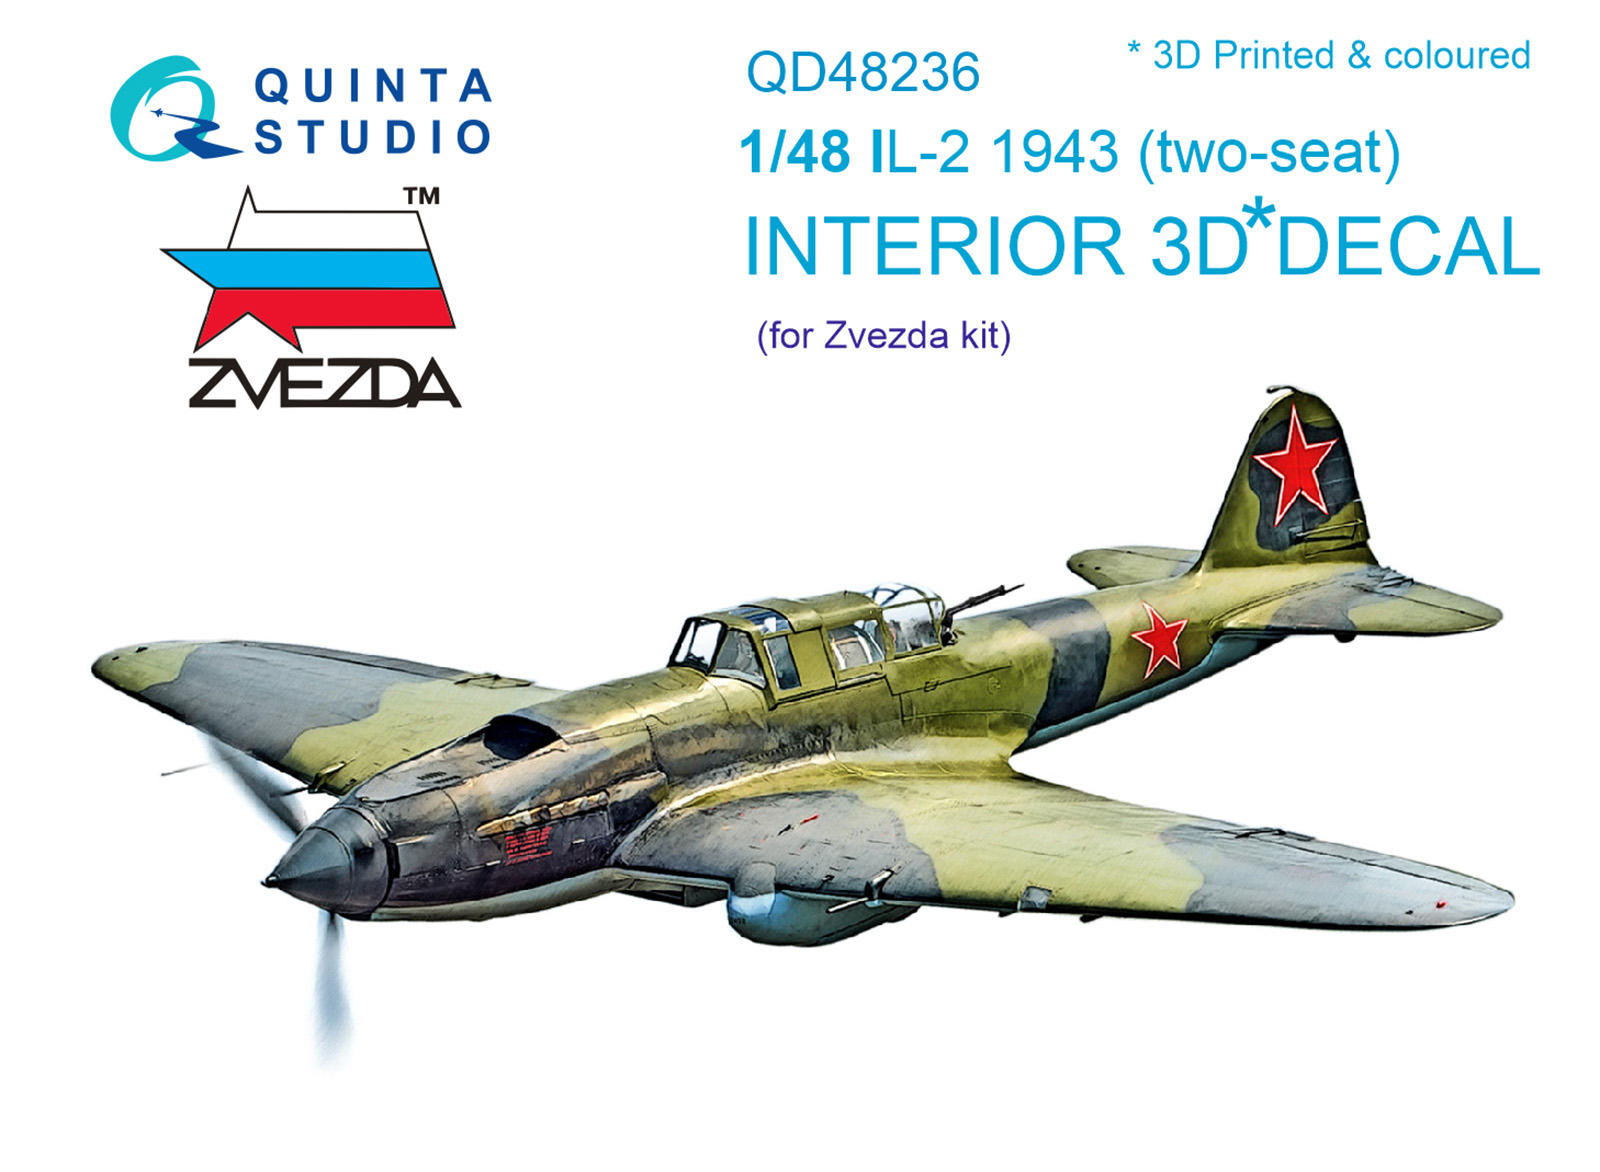 IL-2 1943 (two-seat) 3D-Printed & coloured Interior on decal paper (for Zvezda kit)